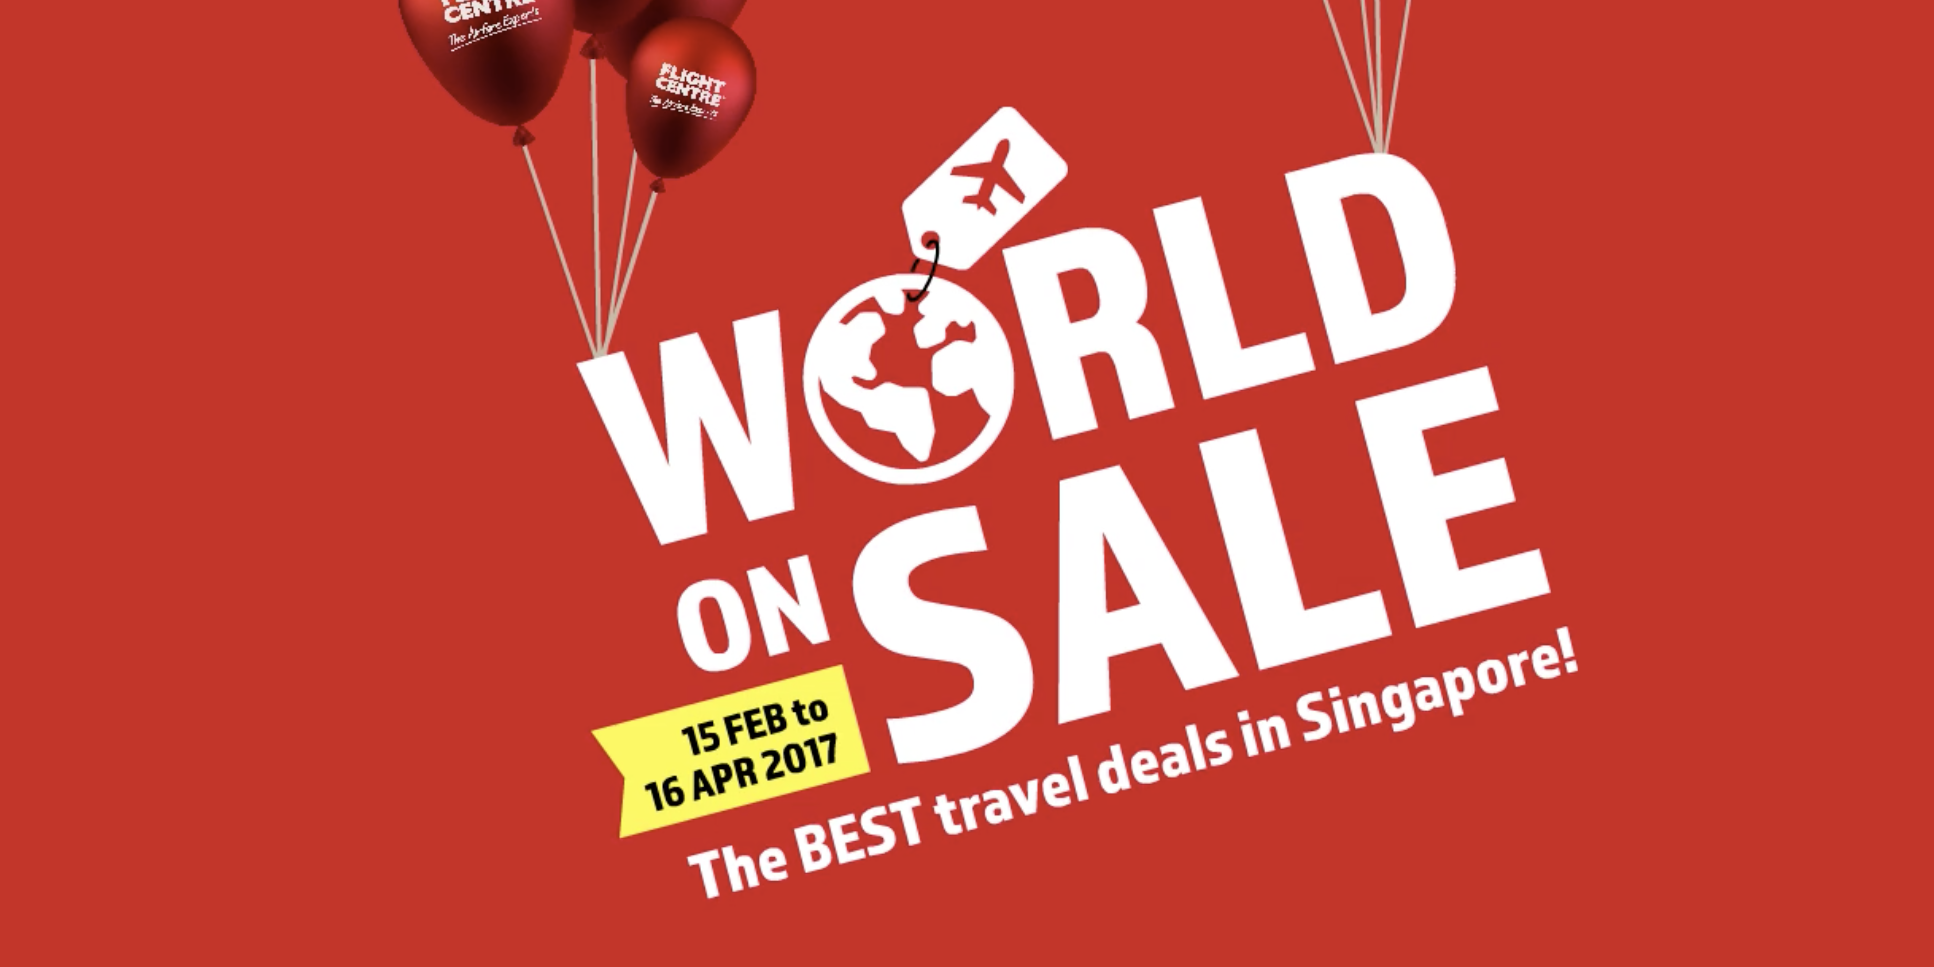 Flight Centre Singapore World on Sale Up to 50% Off Promotion 15 Feb – 16 Apr 2017